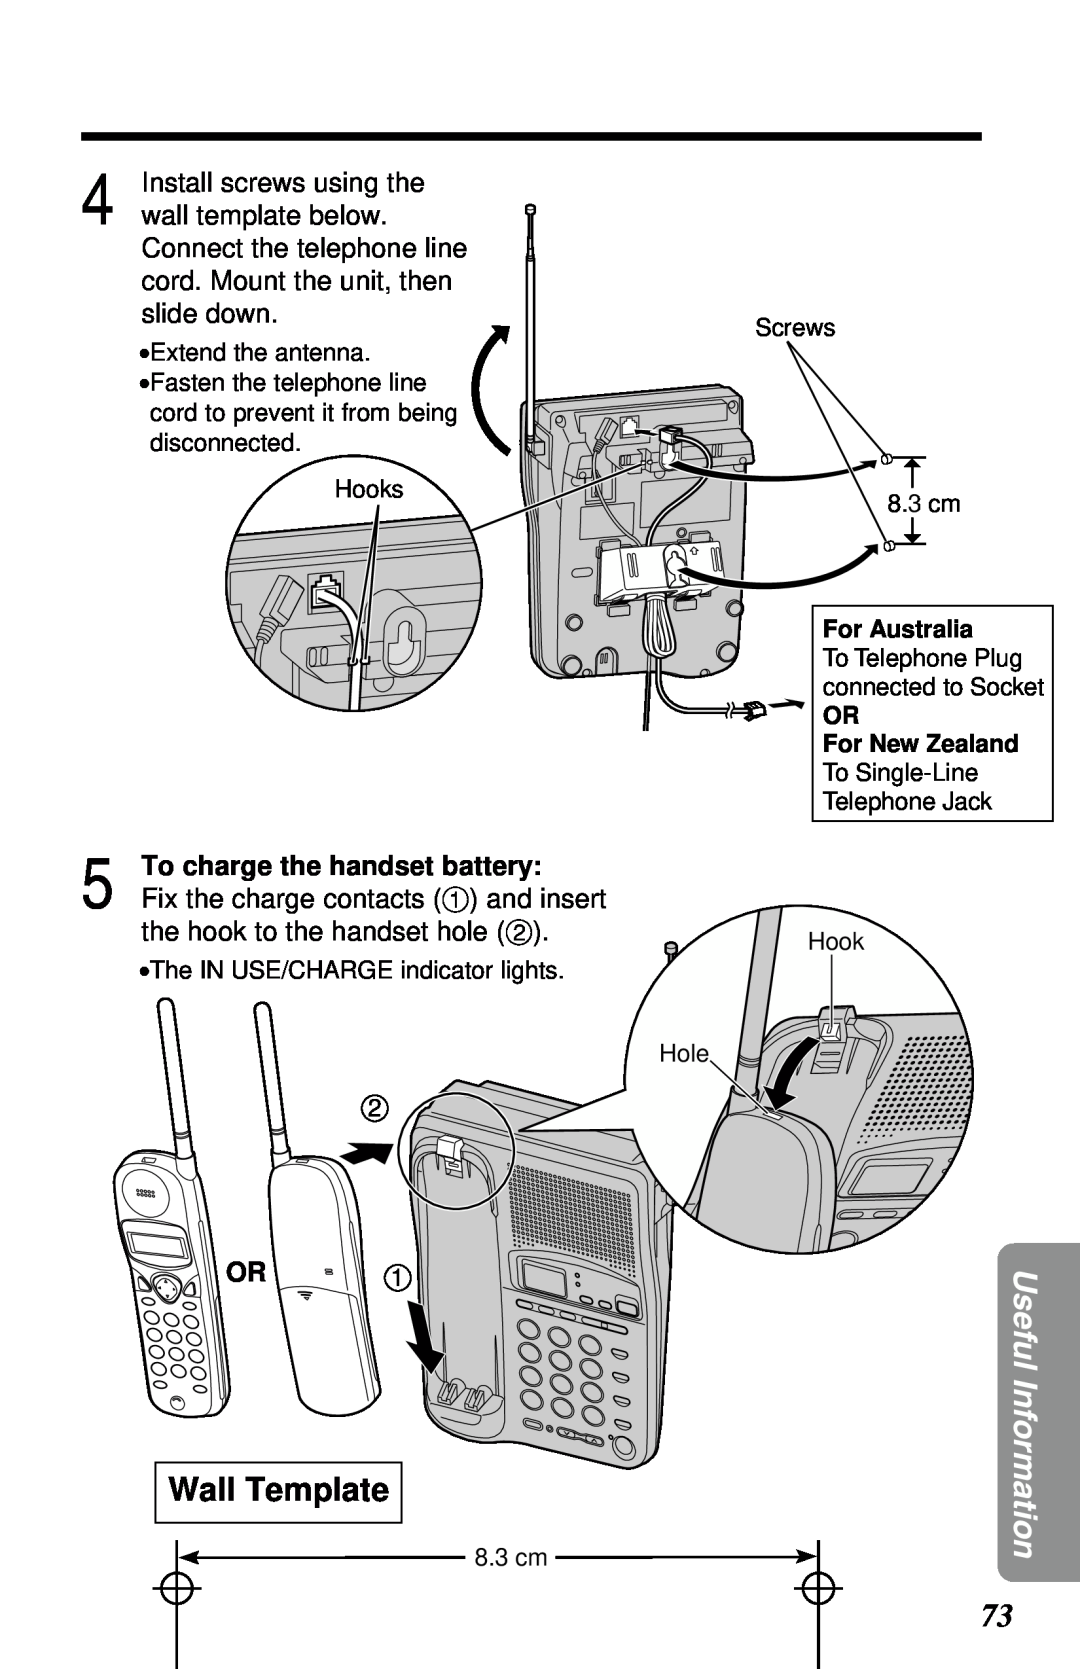 Panasonic KX-TC1230NZW, KX-TC1230ALW Wall Template, To charge the handset battery, Useful Information, For Australia 